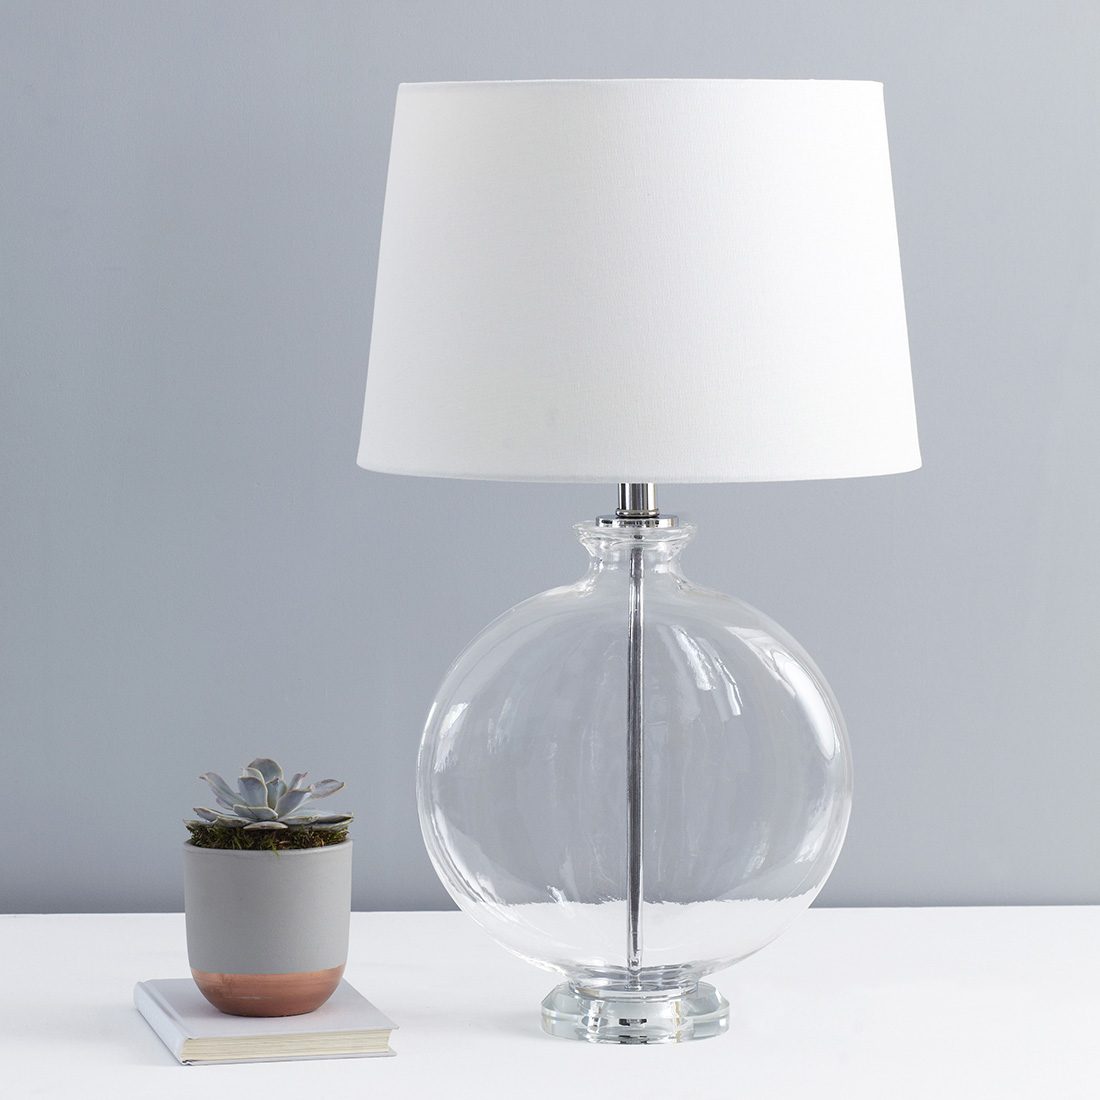 Slim Round Glass Table Lamp With White, Round Table Lamp Base